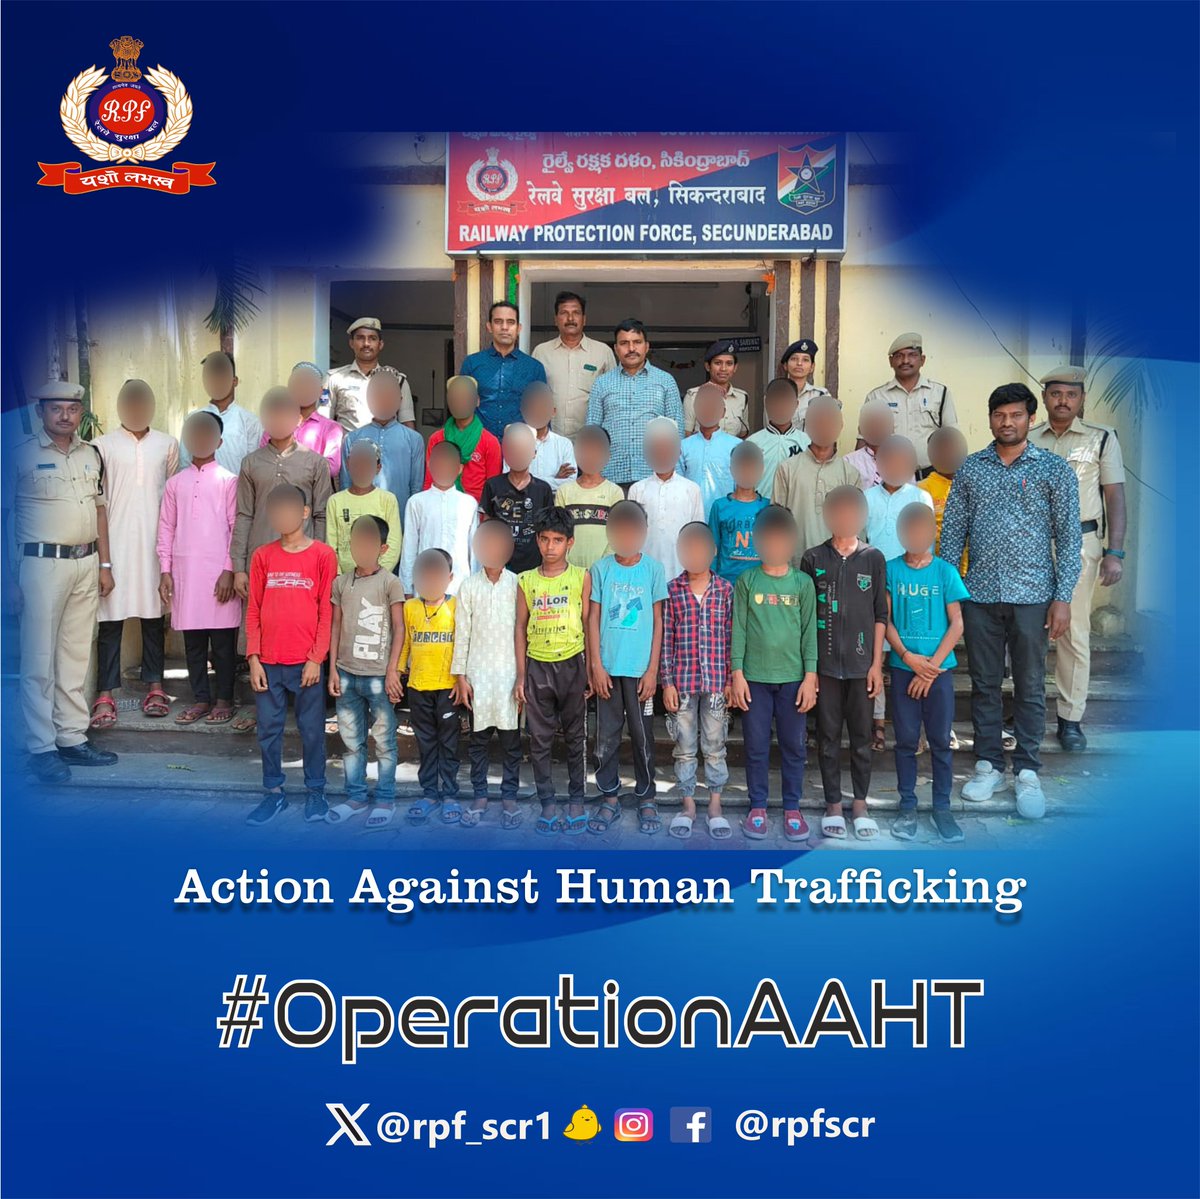 In a major operation, #RPF #Secunderabad in coordination with @BBAIndia and other stakeholders liberates 30 minor boys from captivity and bring 2 traffickers to justice. Join us in the battle for #TraffickingFreeRailways. #OperationAAHT @RPF_INDIA @rpfscr_sc @RailMinIndia